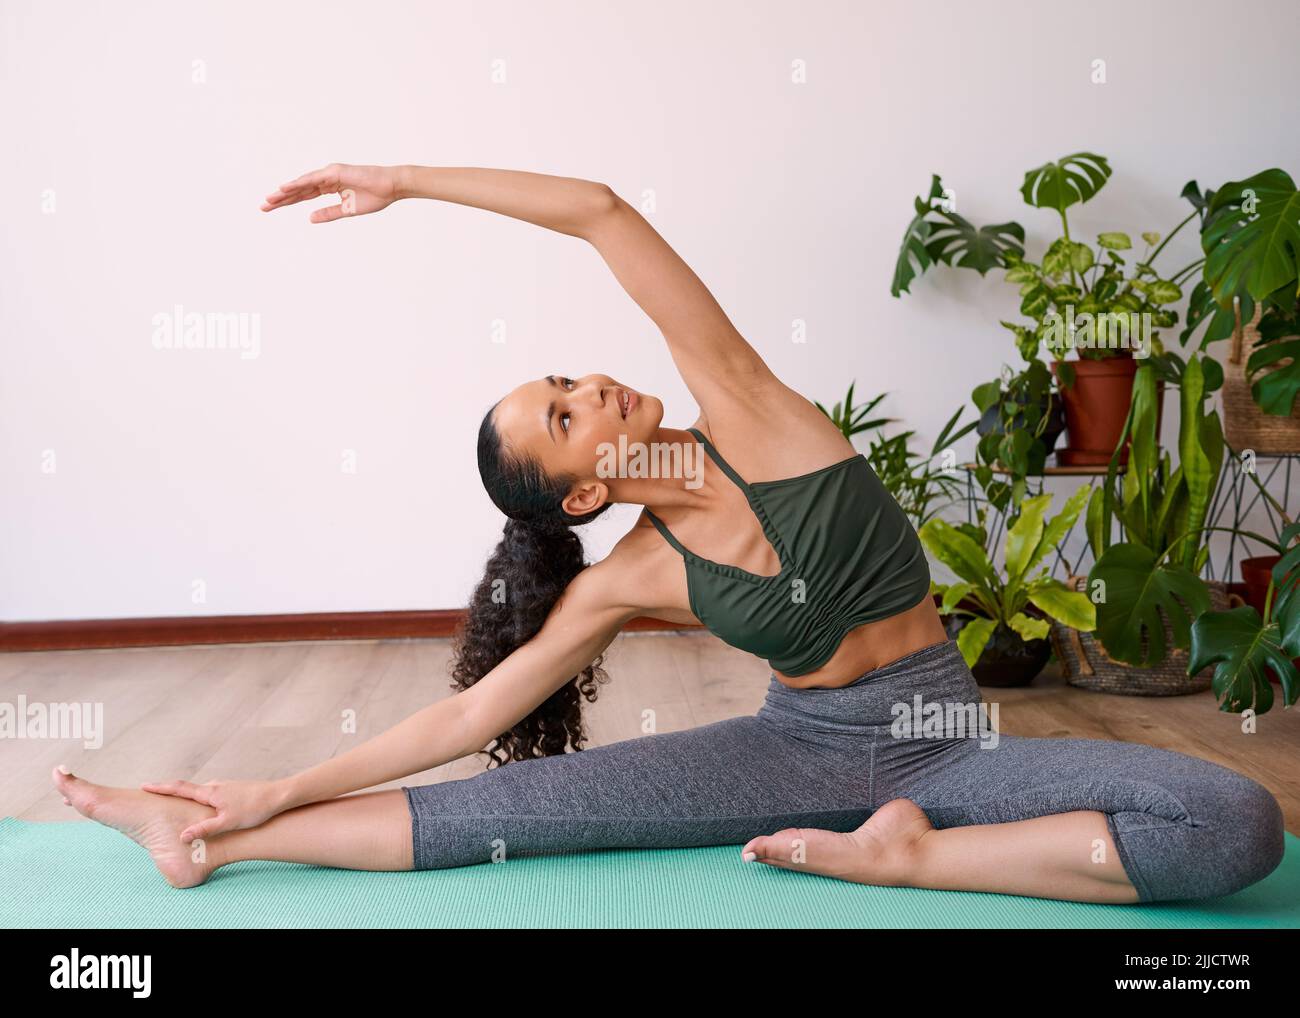 6 couples yoga poses to try for a deeper stretch and connection